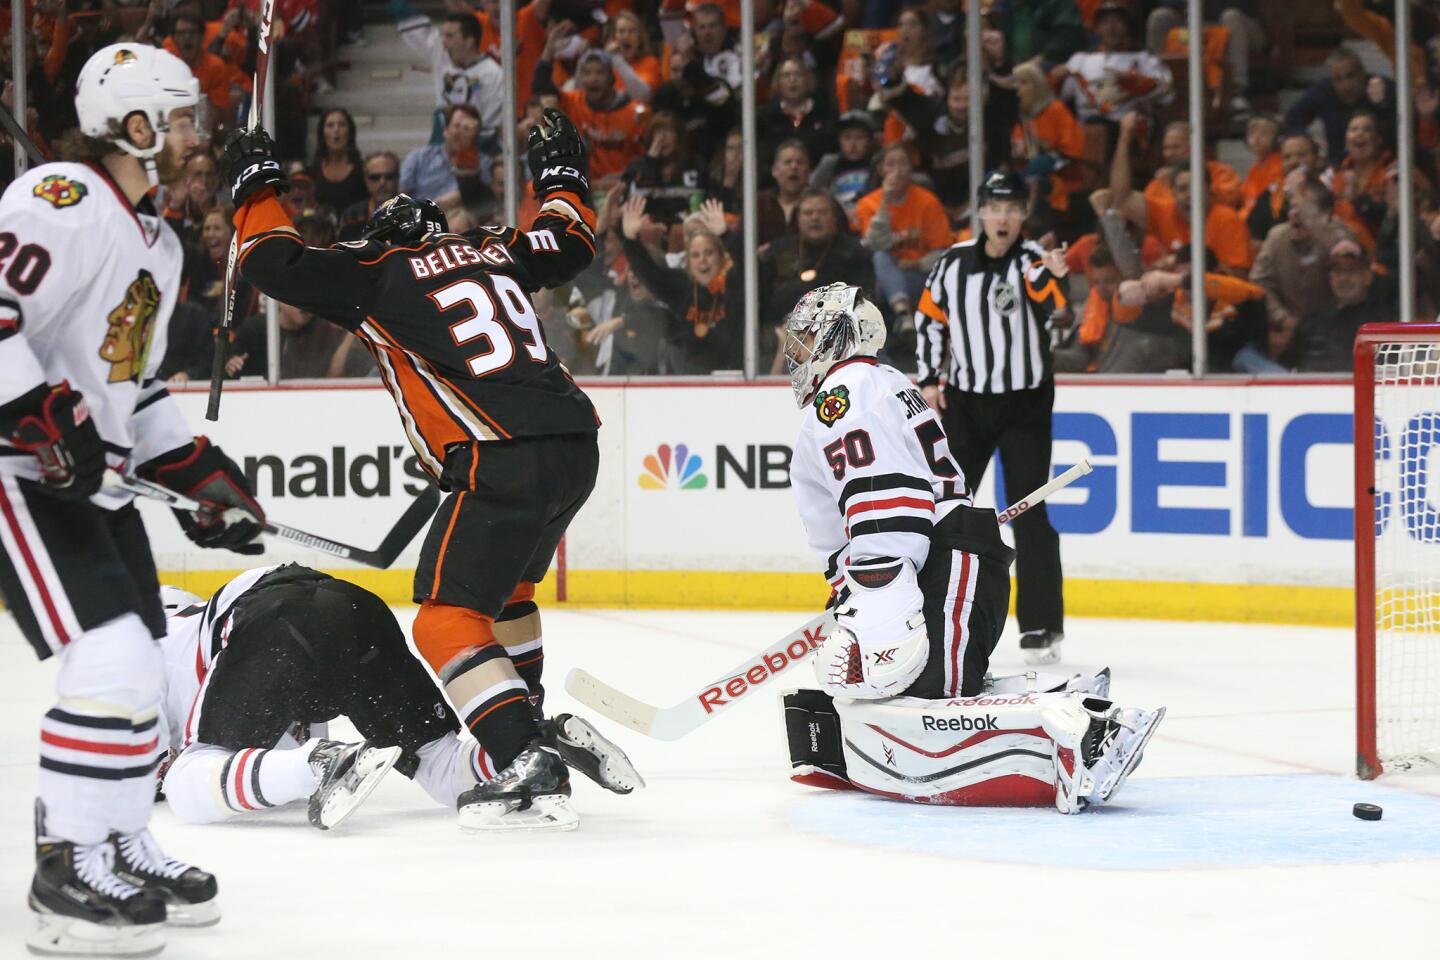 Ducks winger Matt Beleskey celebrates after assisting on a first period goal by teammate Hampus Lindholm to give the Ducks a 1-0 lead over the Blackhawks in Game 1 of the Stanley Cup Western Conference Finals at the Honda Center on Sunday.